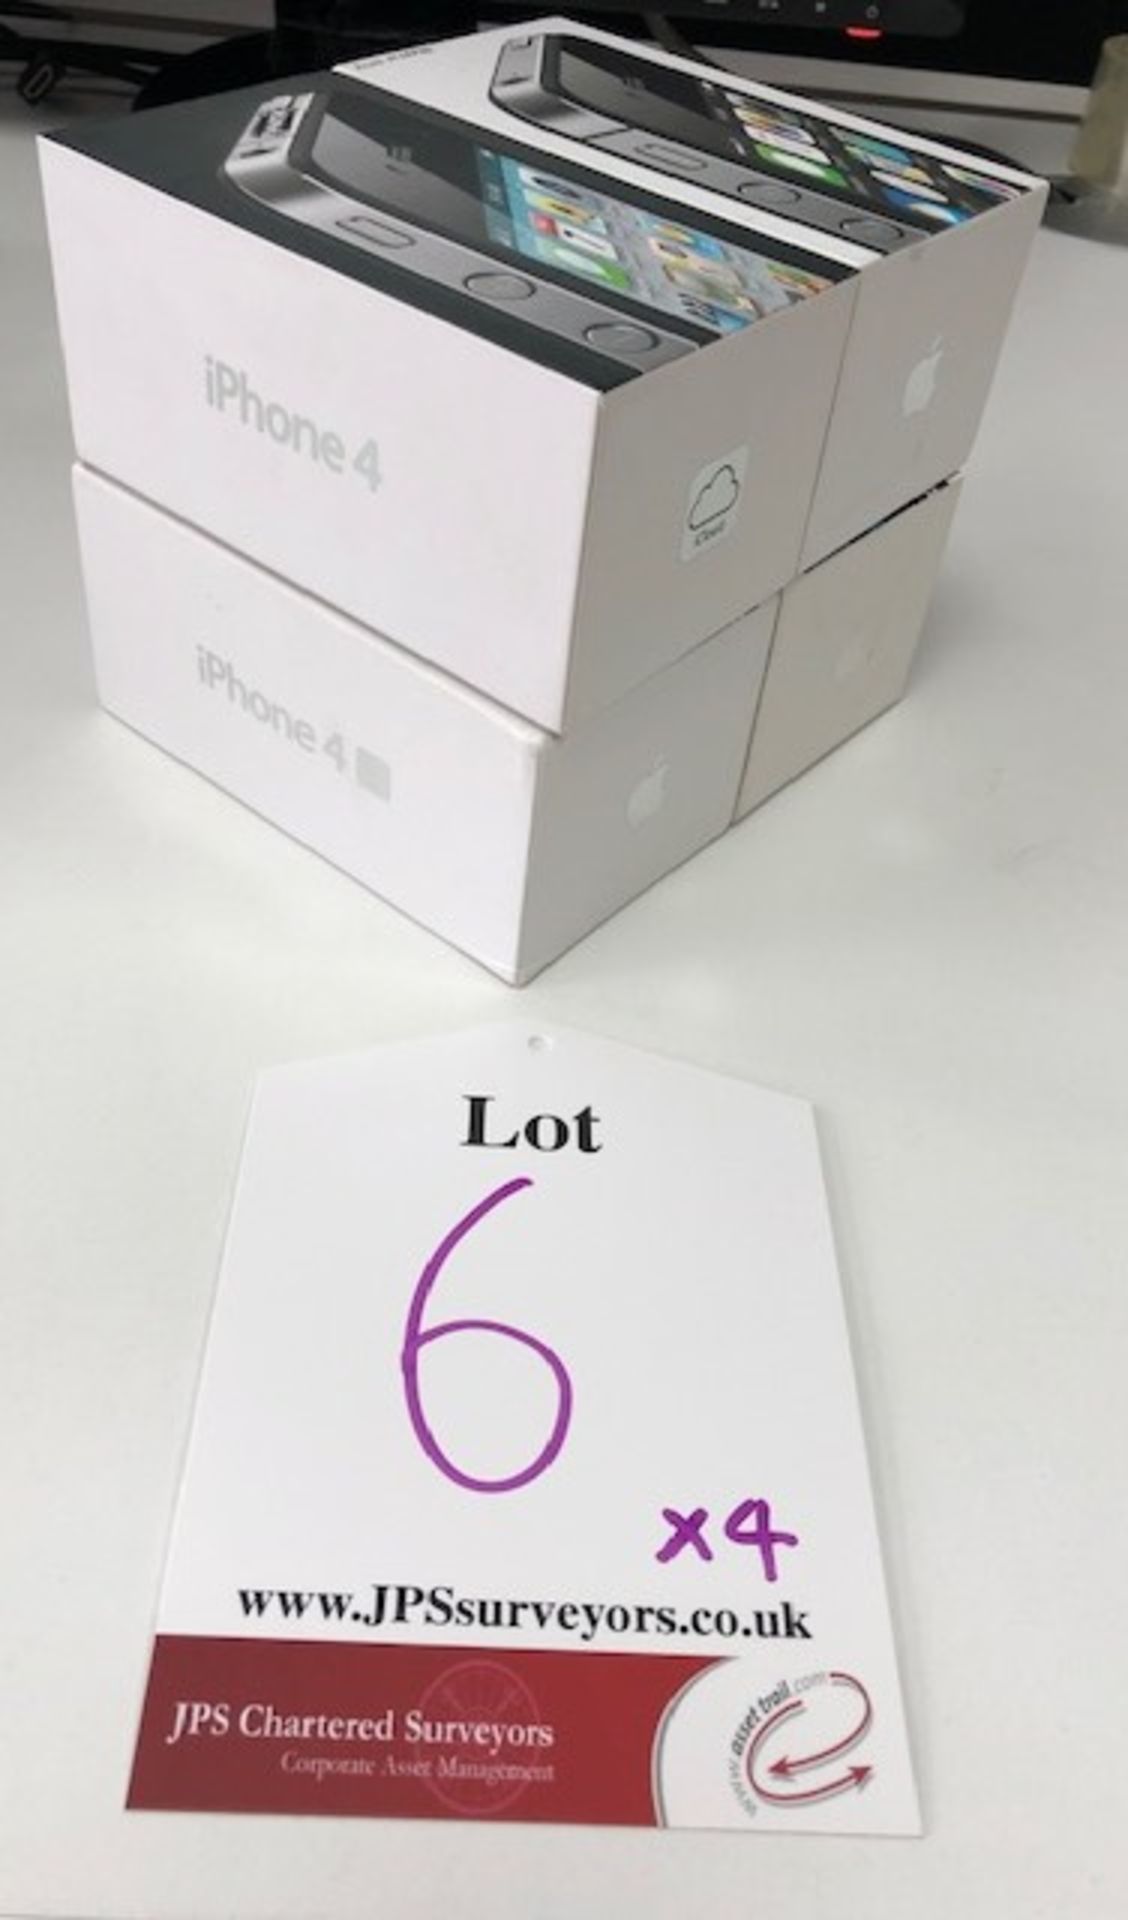 4 x Apple 8GB iPhone 4/4s Mobile Phones | IN BOXES | NO CHARGERS